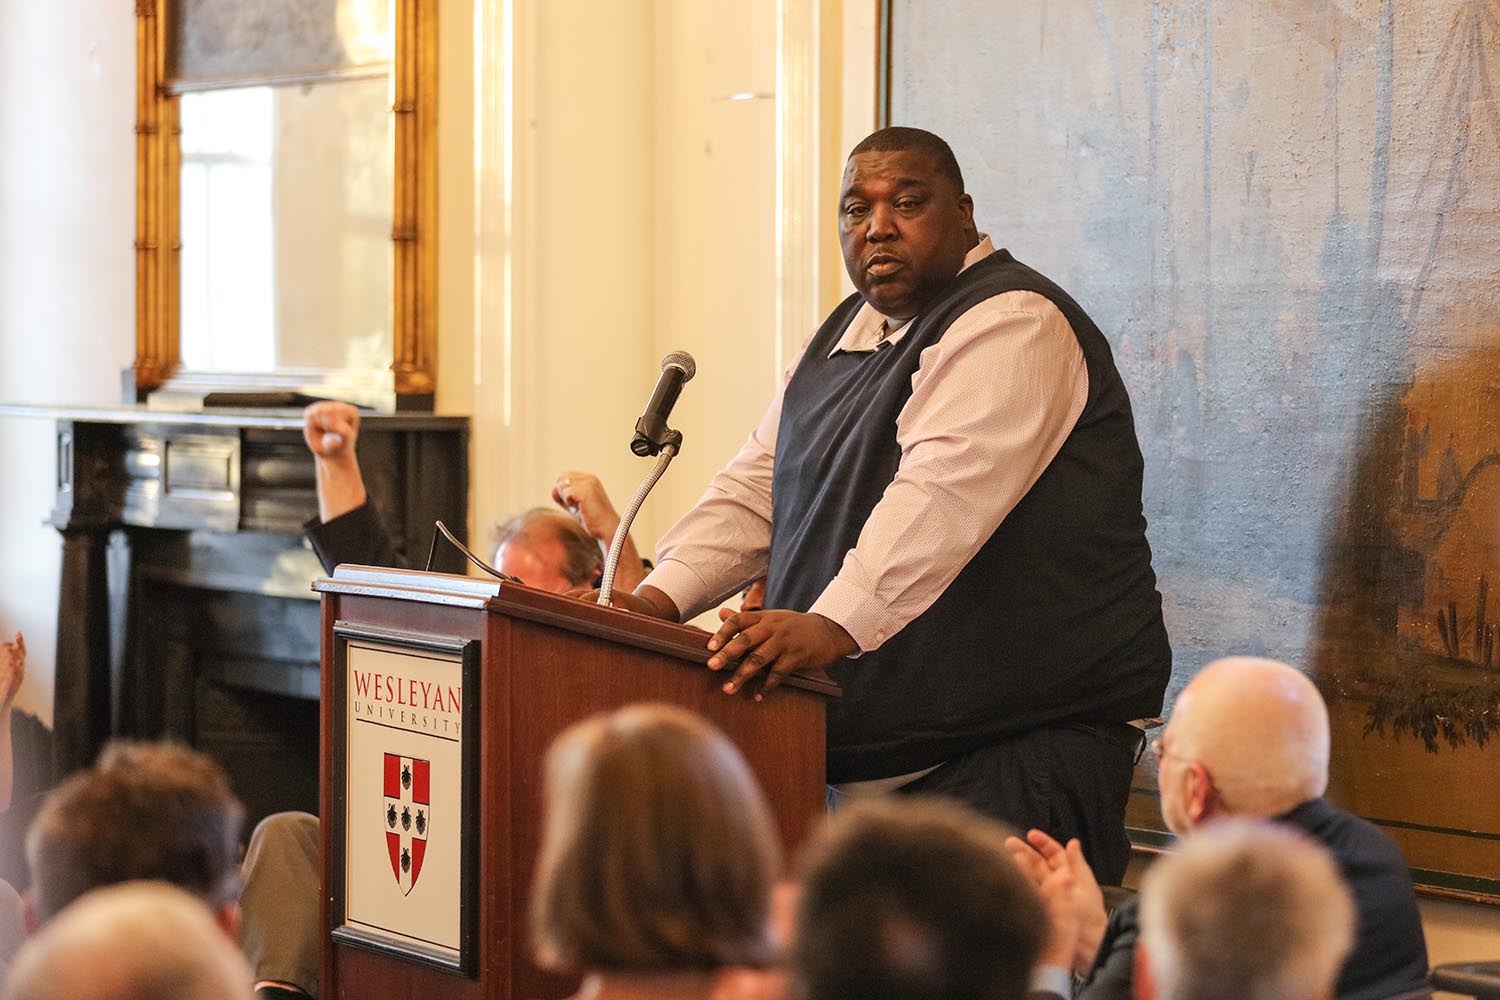 William Juneboy Outlaw III, Barber's collaborator and the subject of his book, spoke movingly about his transformation. Today, he uses his lived experience as a former felon and gang leader as a cautionary tale to warn young people in New Haven about the consequences of the criminal life.